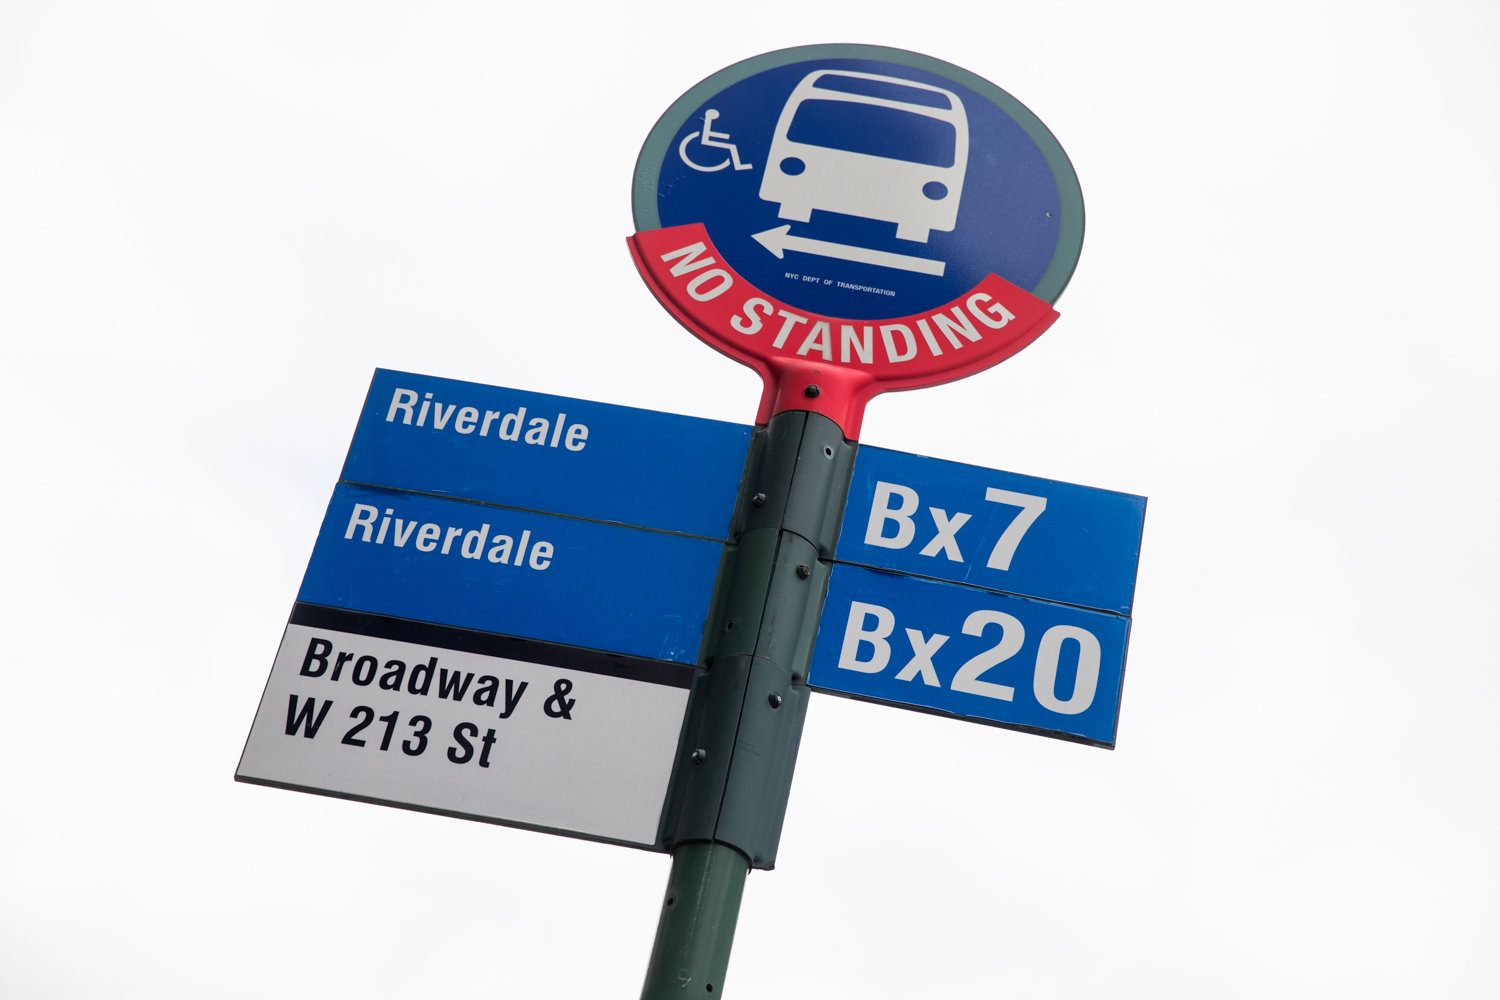 While the proposed changes to the Bx7 bus route are not as drastic as other lines in the borough, the MTA plans to remove 13 stops from the route, including this one at West 213th Street and Broadway.